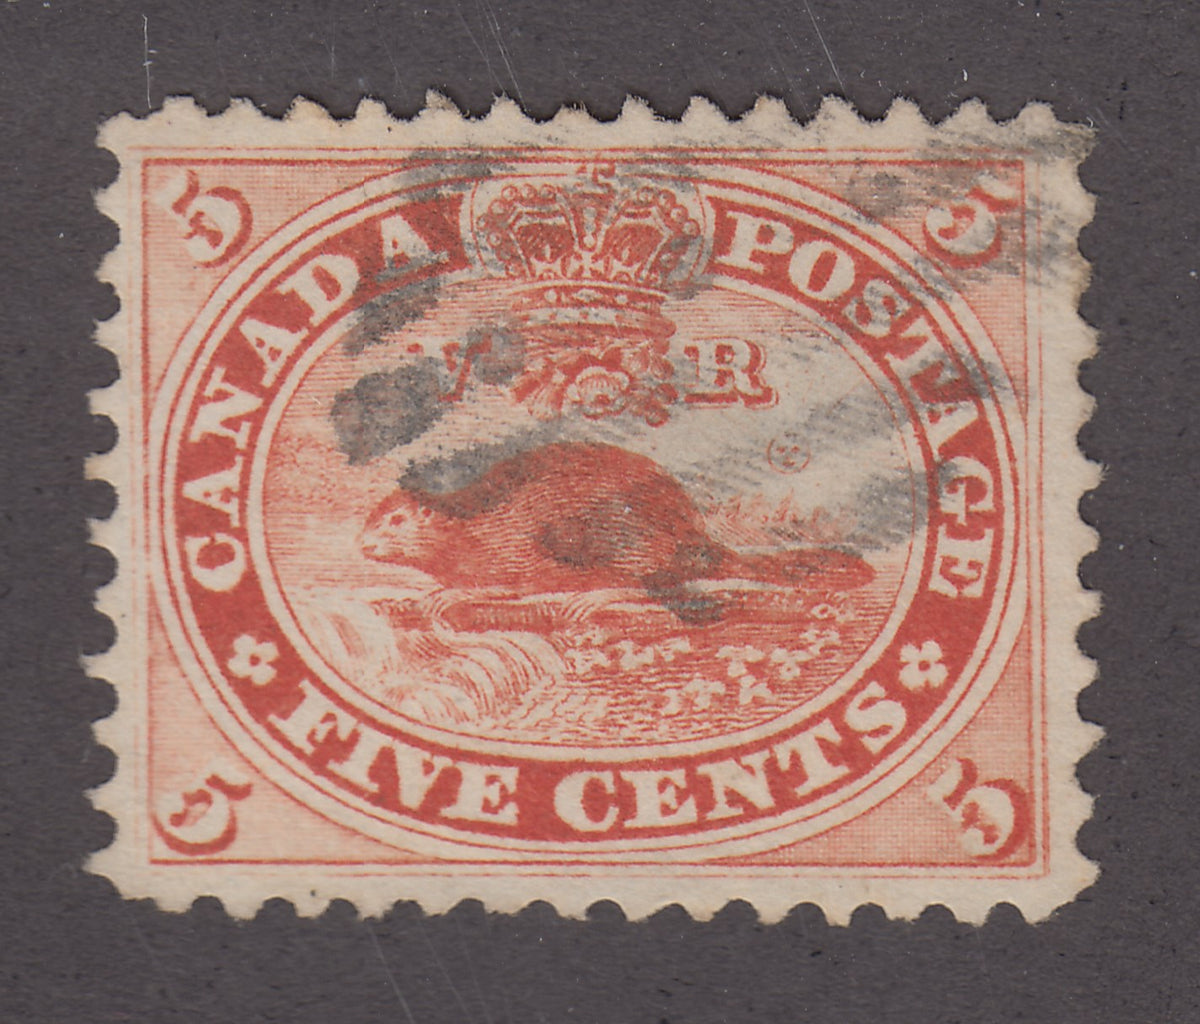 0015CA1707 - Canada #15 - Used Re-Entry